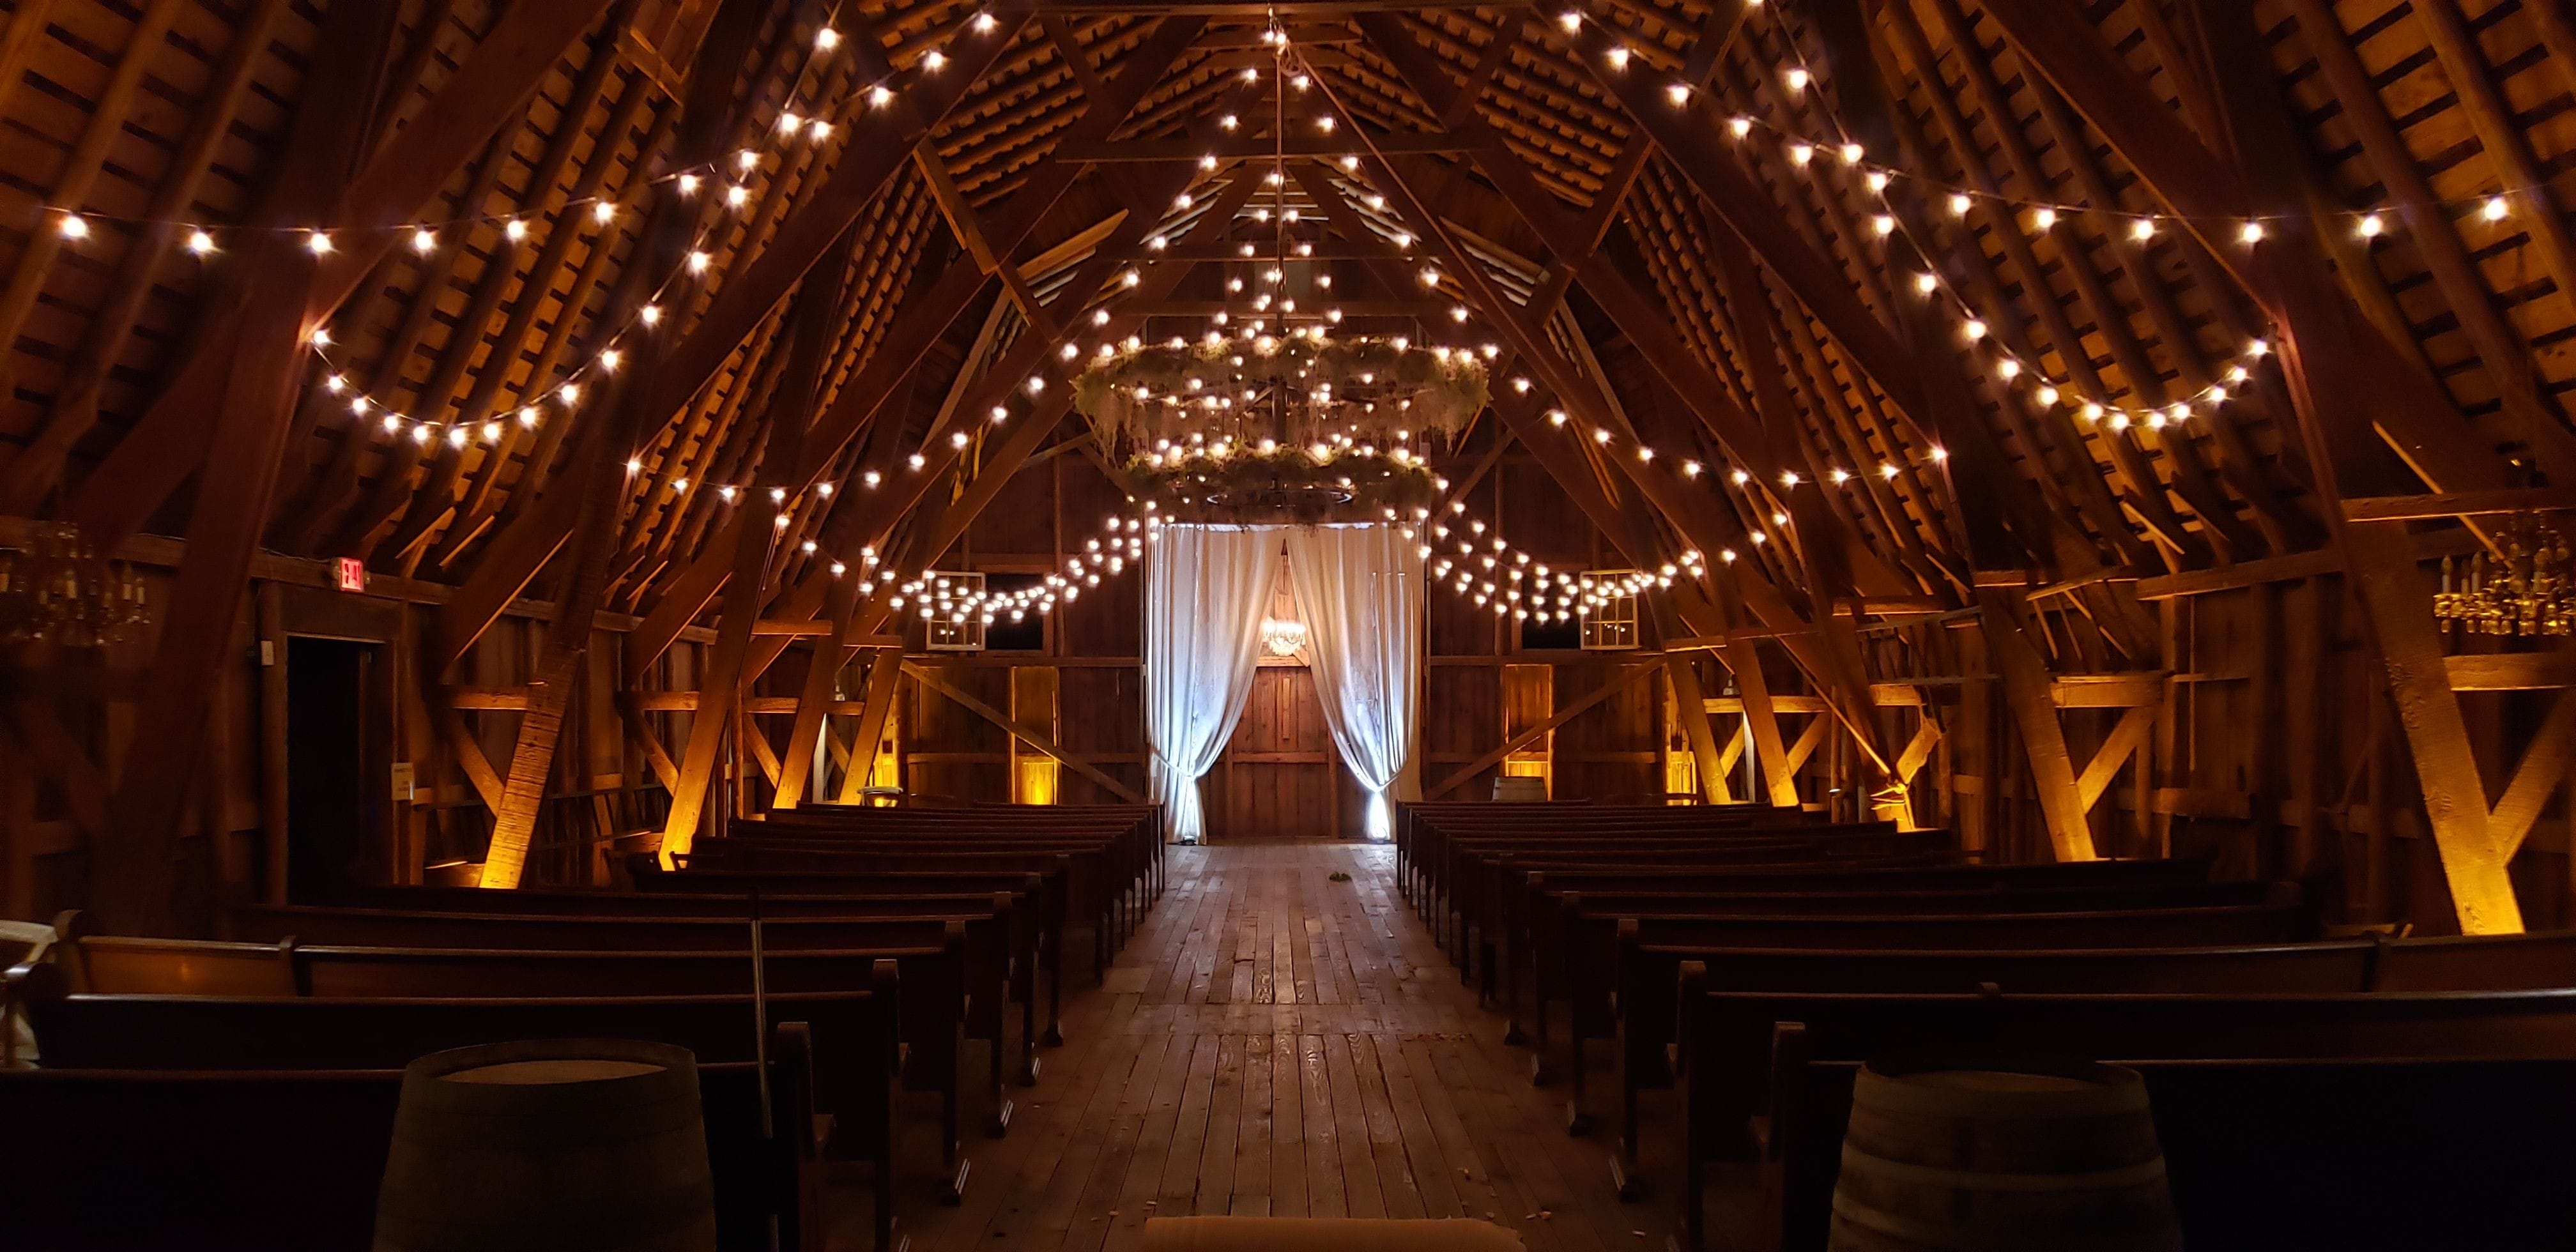 The Grainary's wedding barn with amber up lighting by Duluth Event Lighting for a wedding.